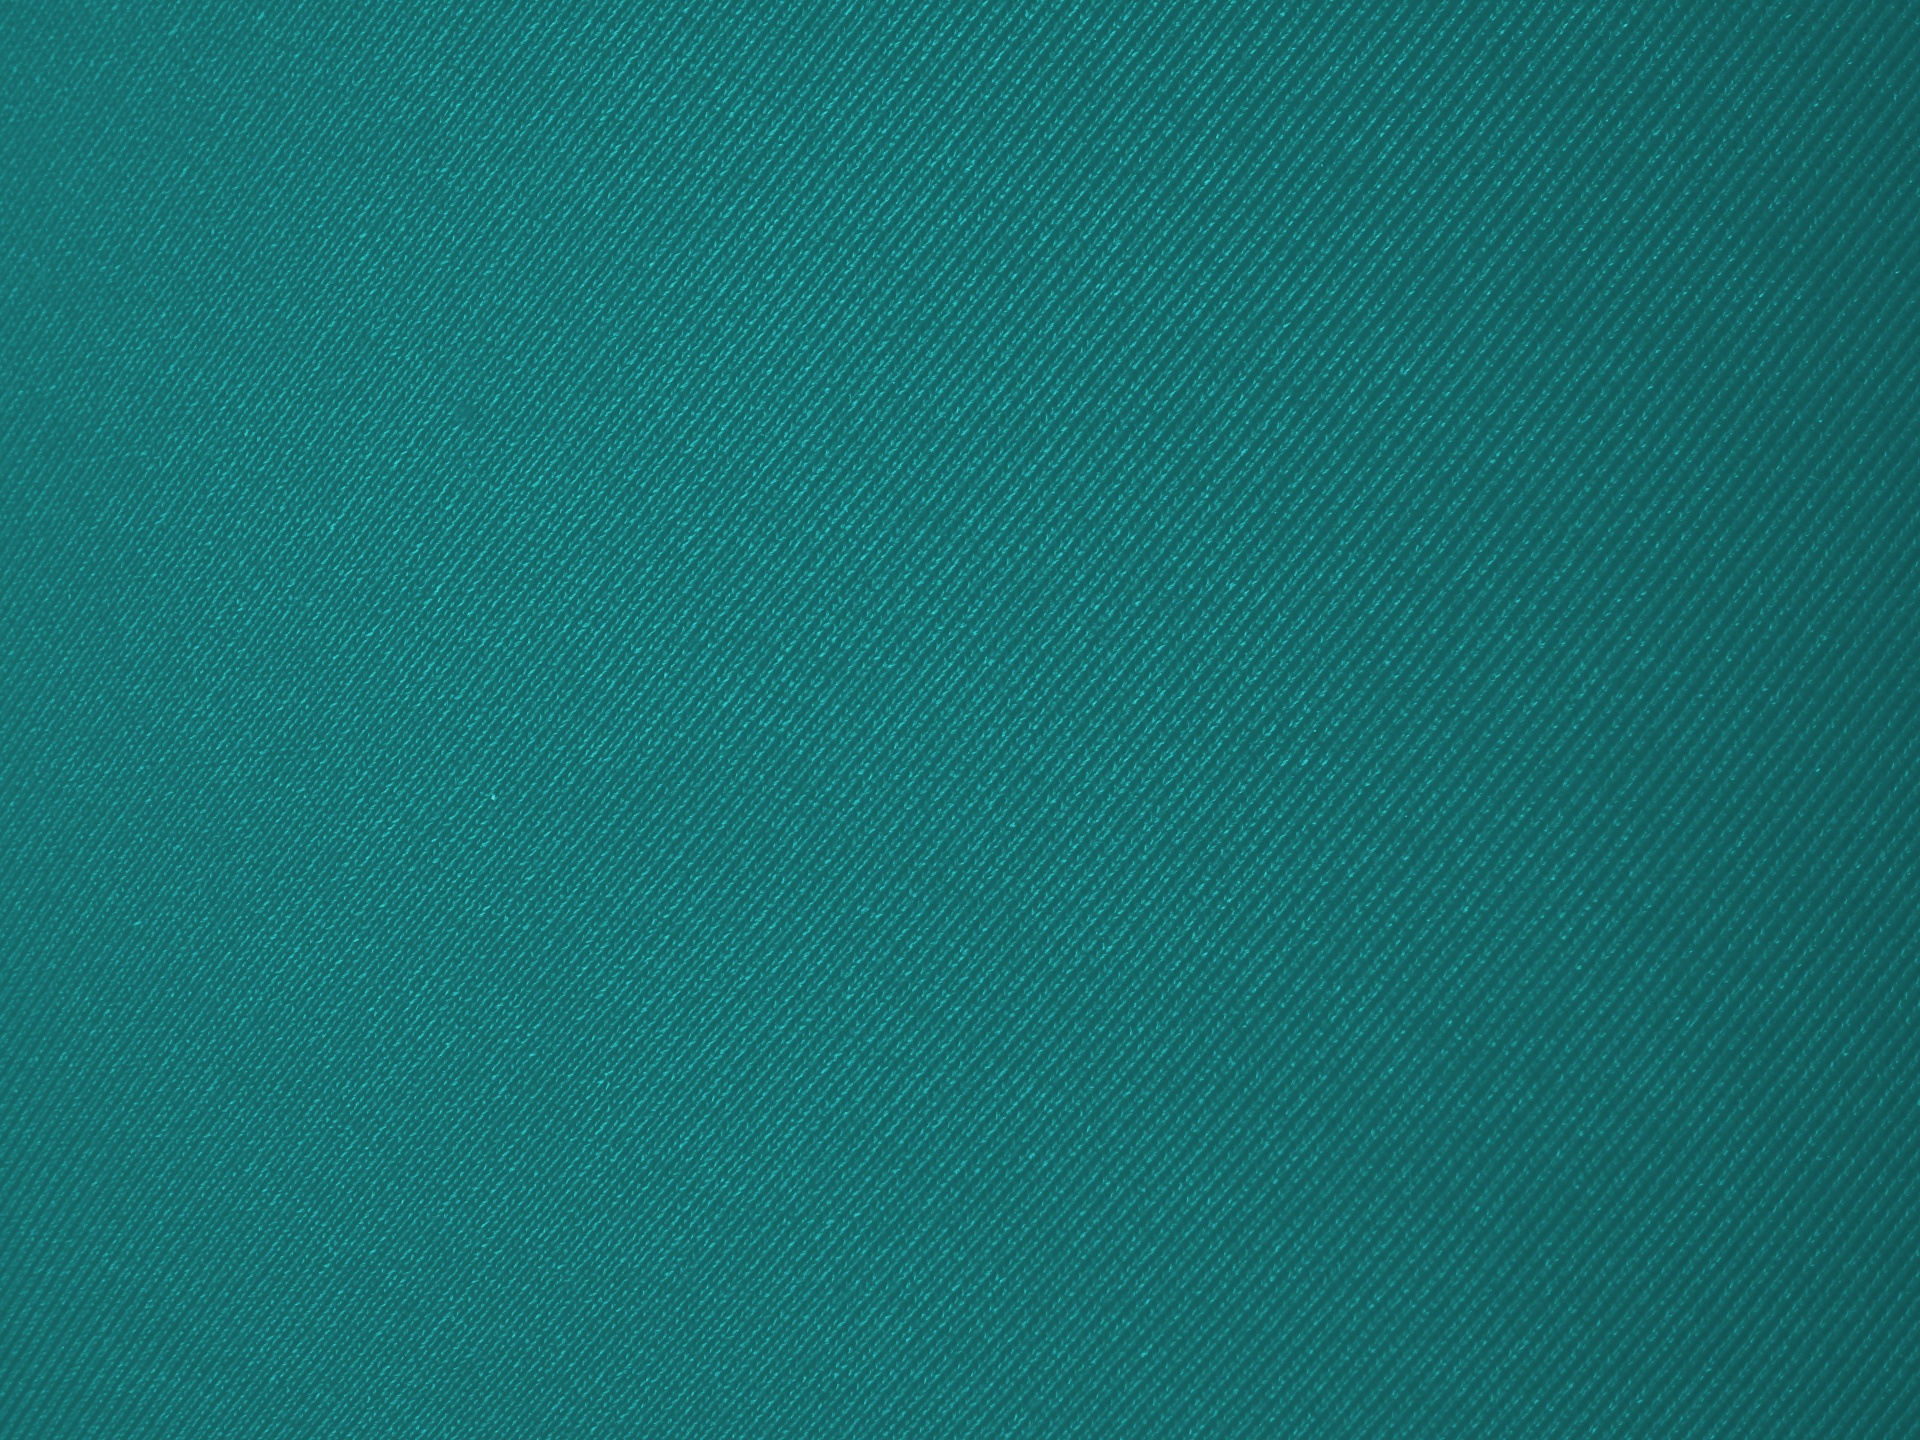 Turquoise,green,blue,backgrounds,material - free image from 